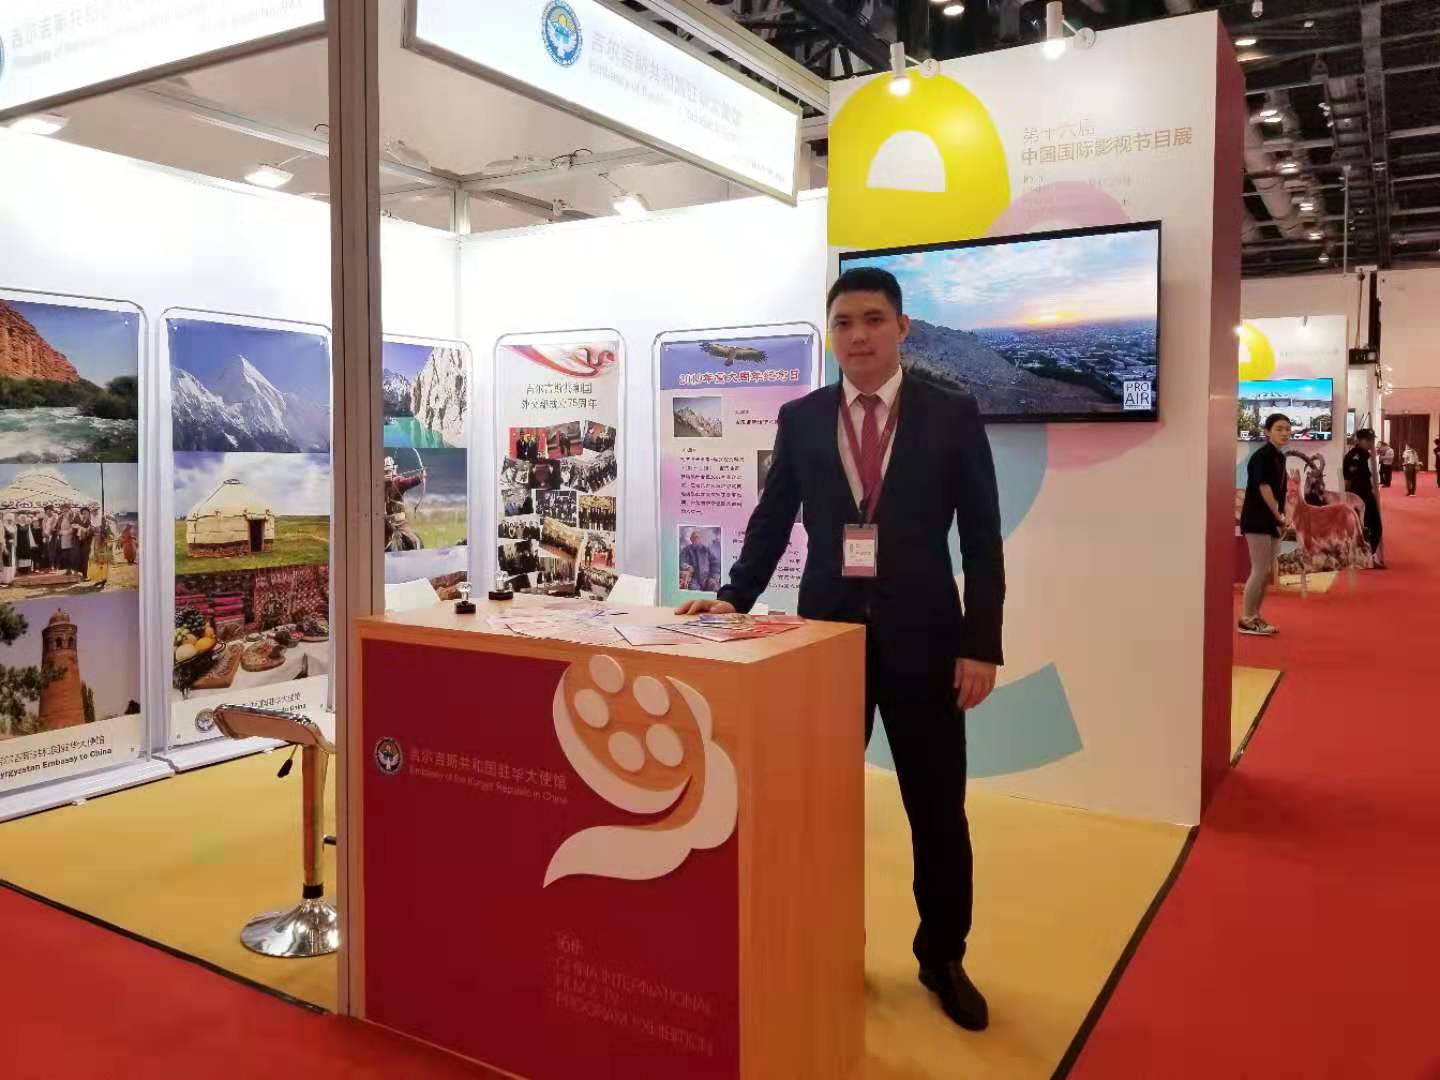 On September 11 and 12, 2019 the Embassy of Kyrgyz Republic to China participated in the 16th session of the China International Film and Television EXPO (CIFTPE).